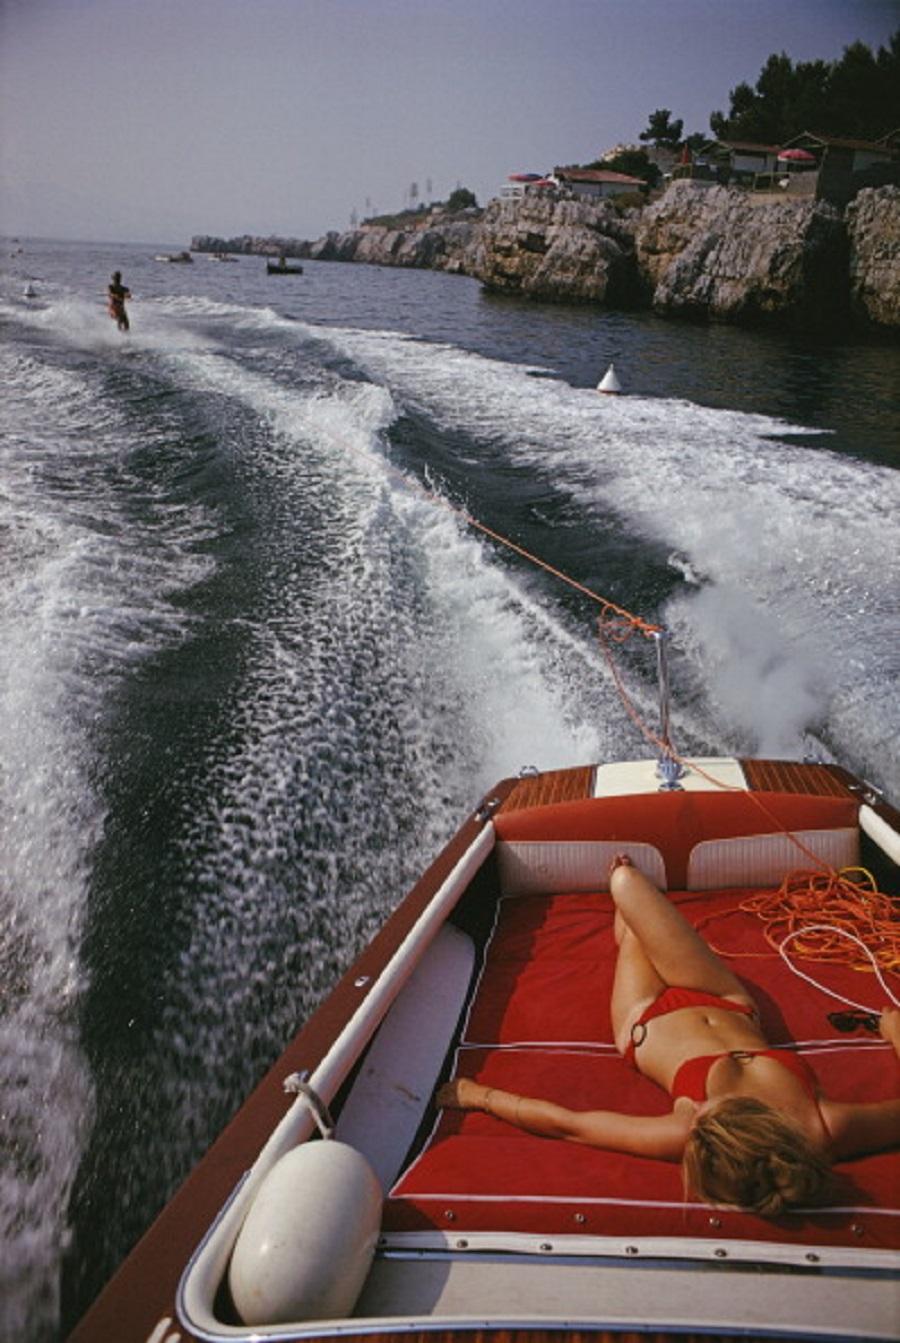 'Leisure In Antibes' 1969 Slim Aarons Limited Estate Edition Print 

A woman sunbathing in a motorboat as it tows a waterskiier, in the sea off the Hotel du Cap-Eden-Roc in Antibes on the French Riviera, August 1969. 

Produced from the original